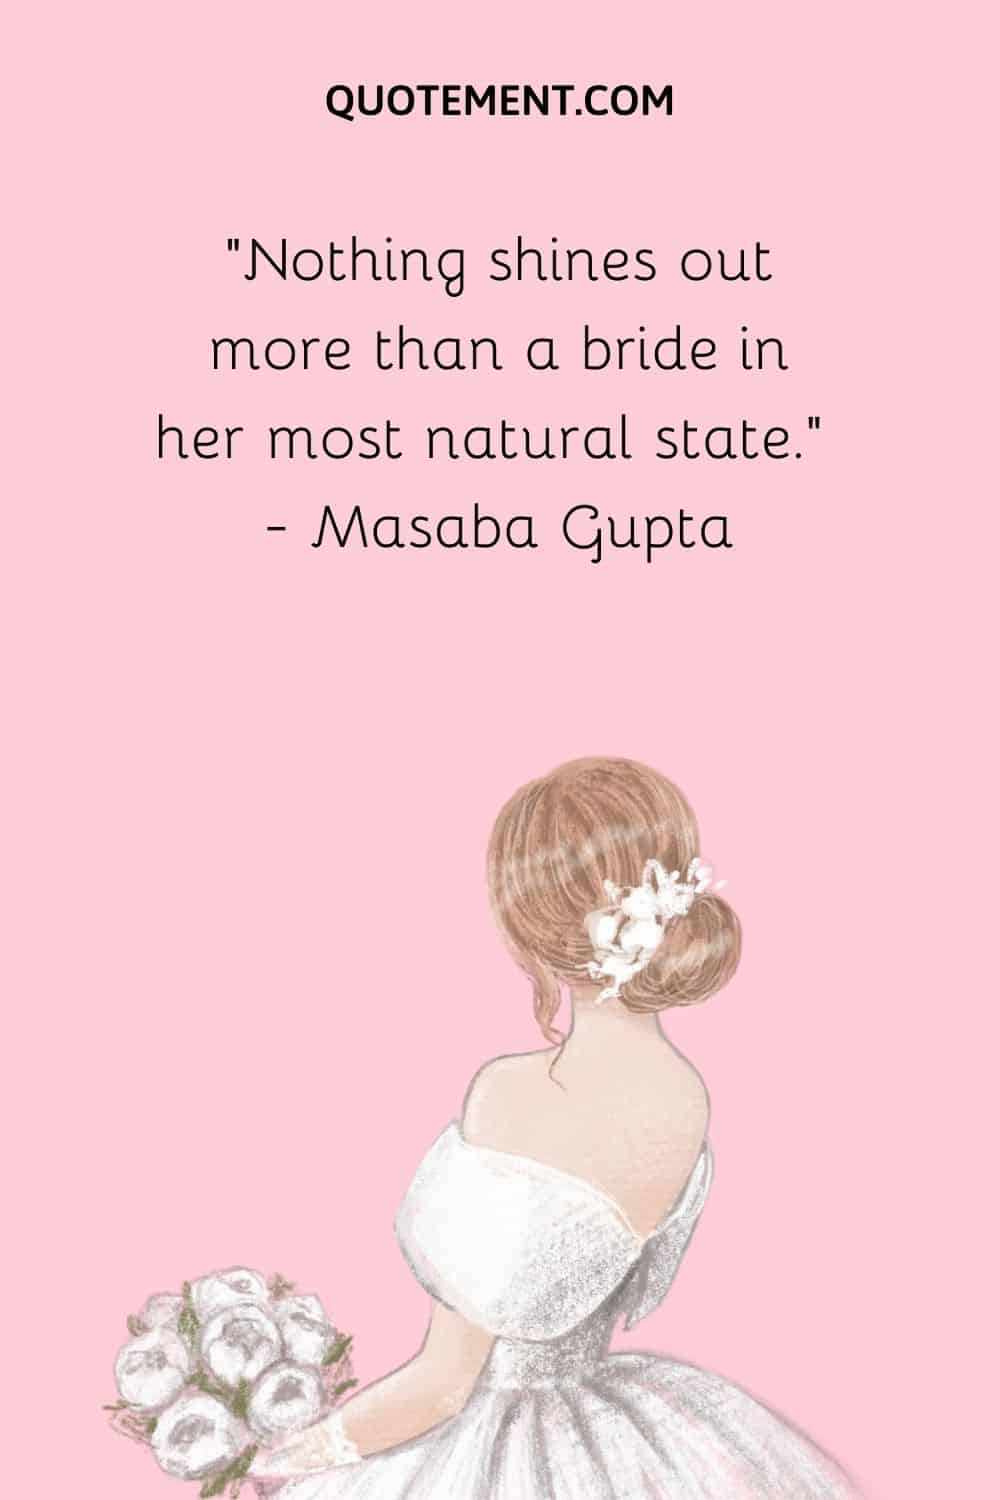 Nothing shines out more than a bride in her most natural state. — Masaba Gupta